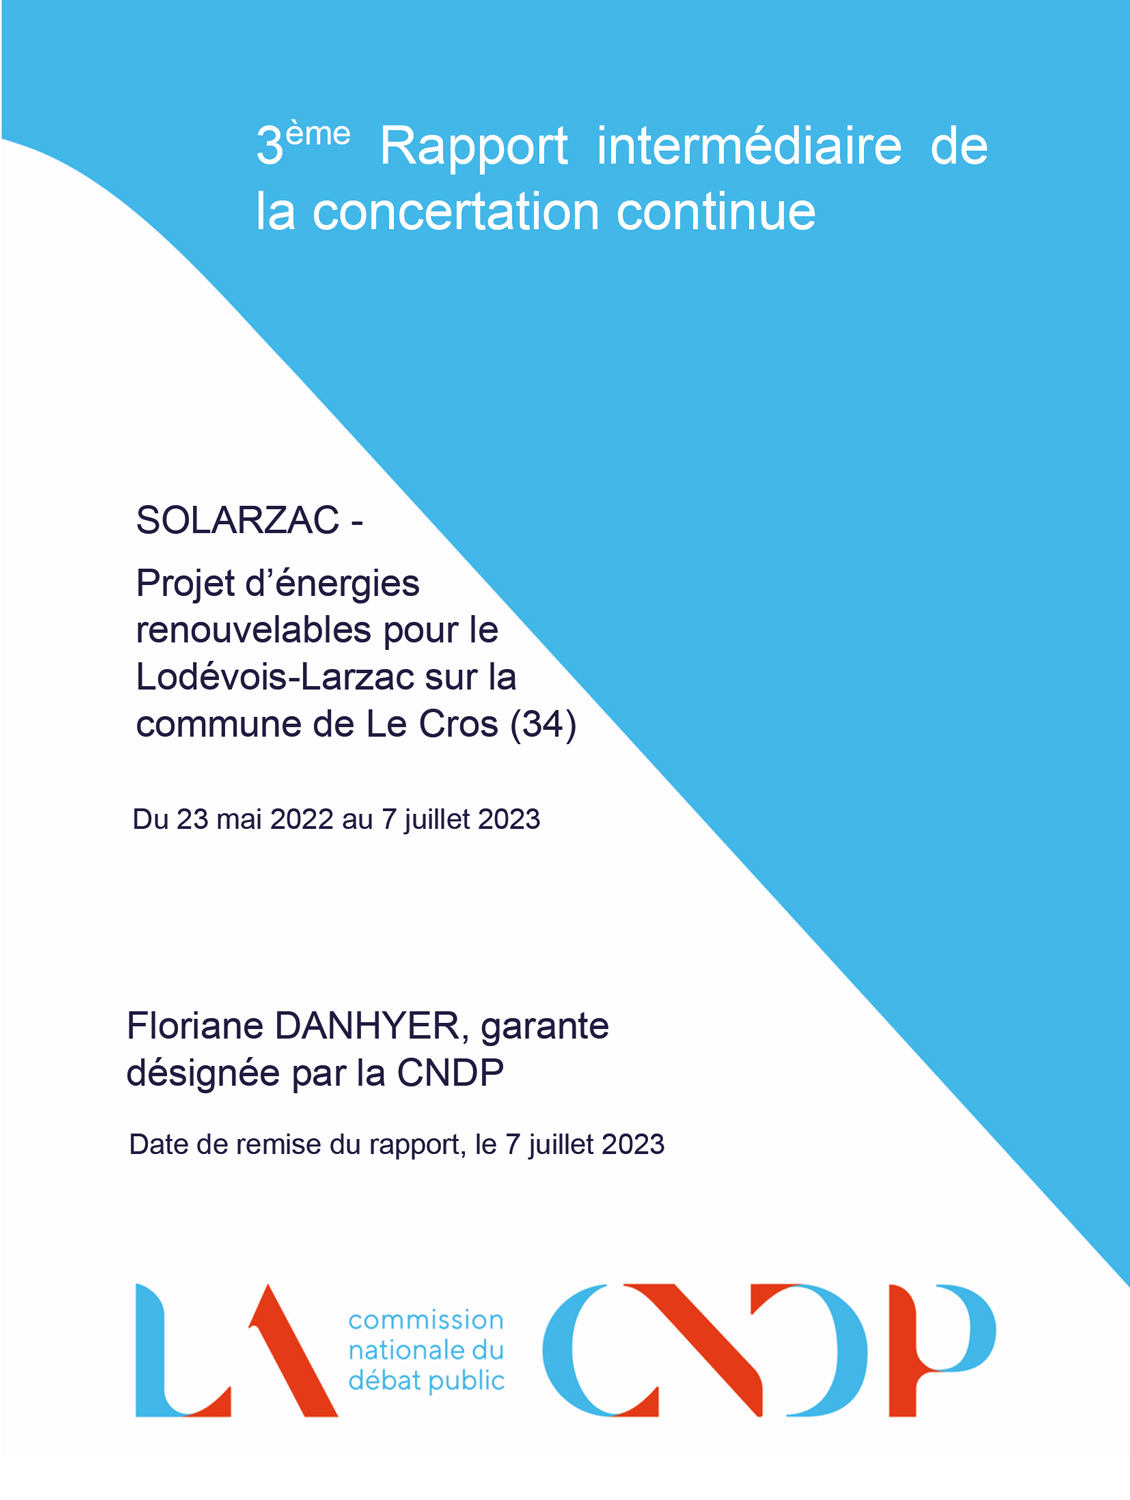 Solarzac Rapport Intermediaire N3 Concertation Continue 202307 Vdef 1